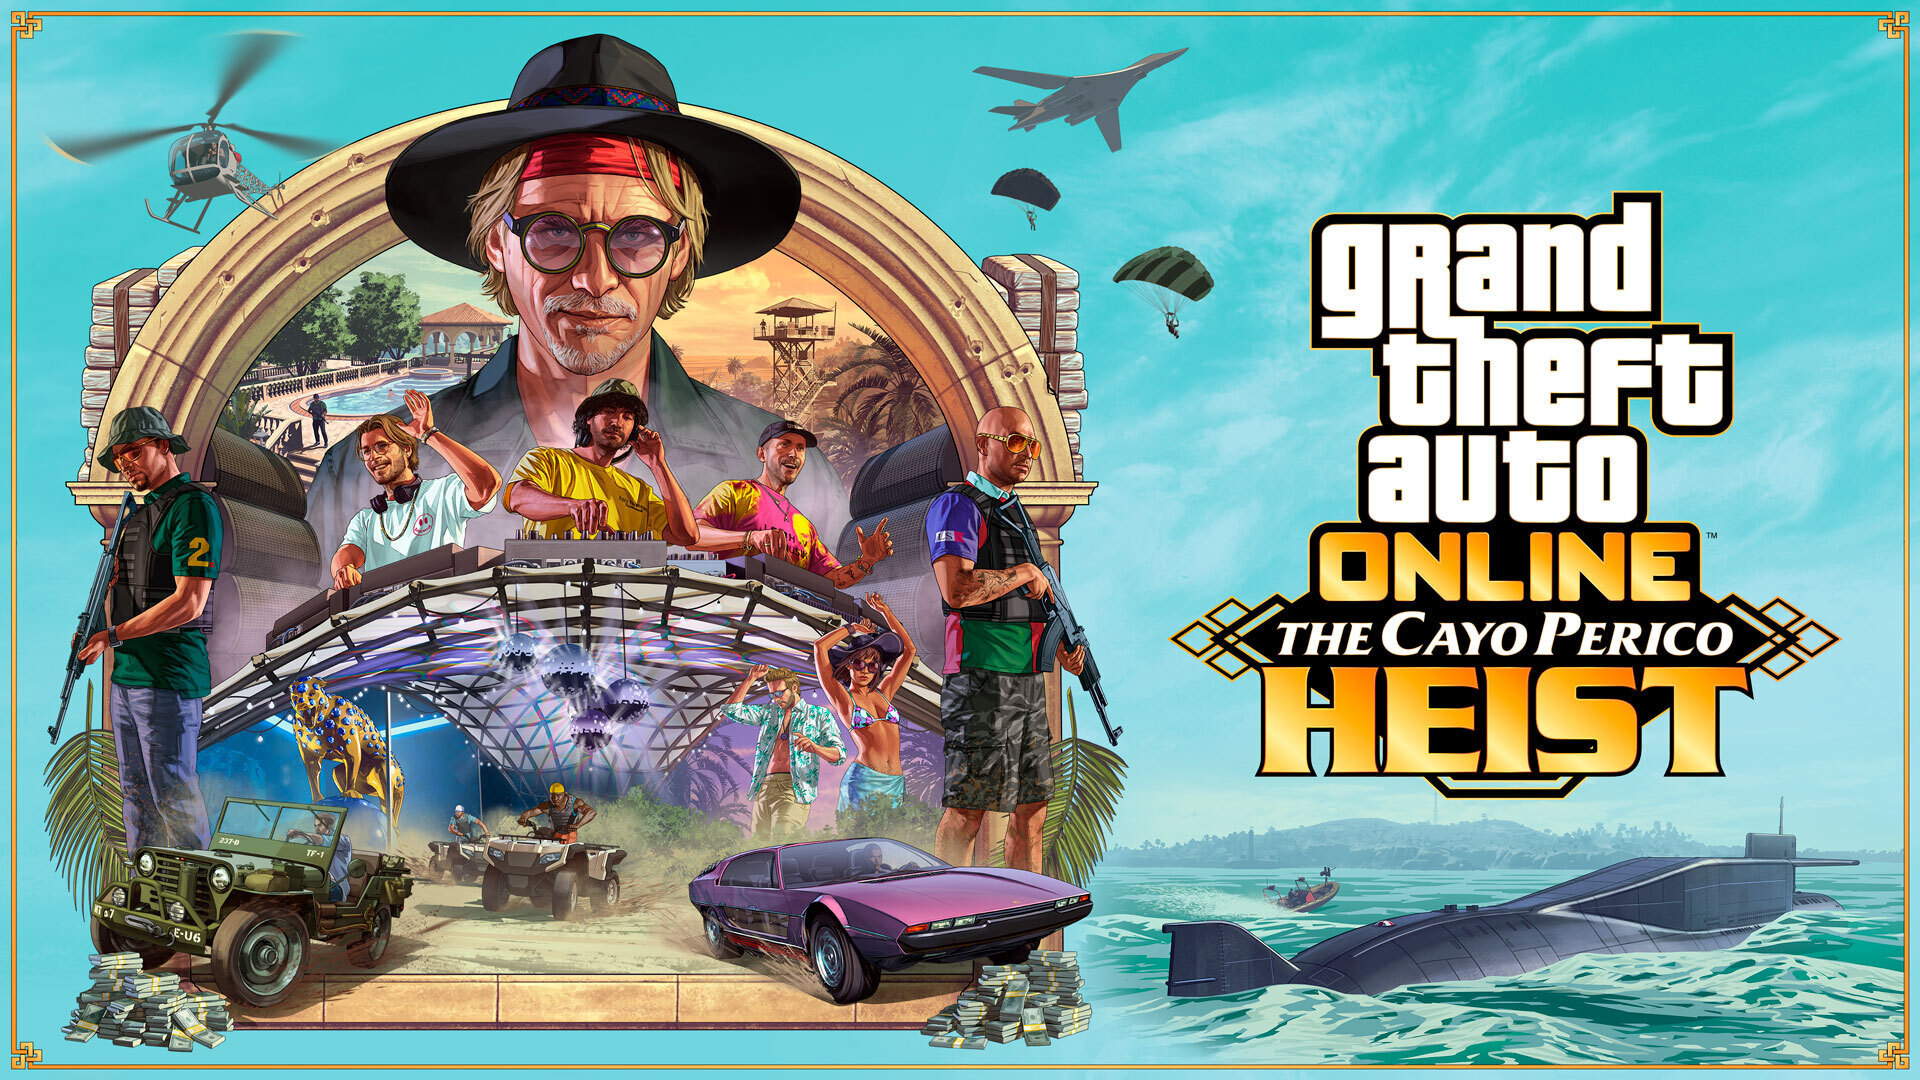 Free PS5 game download out now - Play GTA Online without spending a penny, Gaming, Entertainment